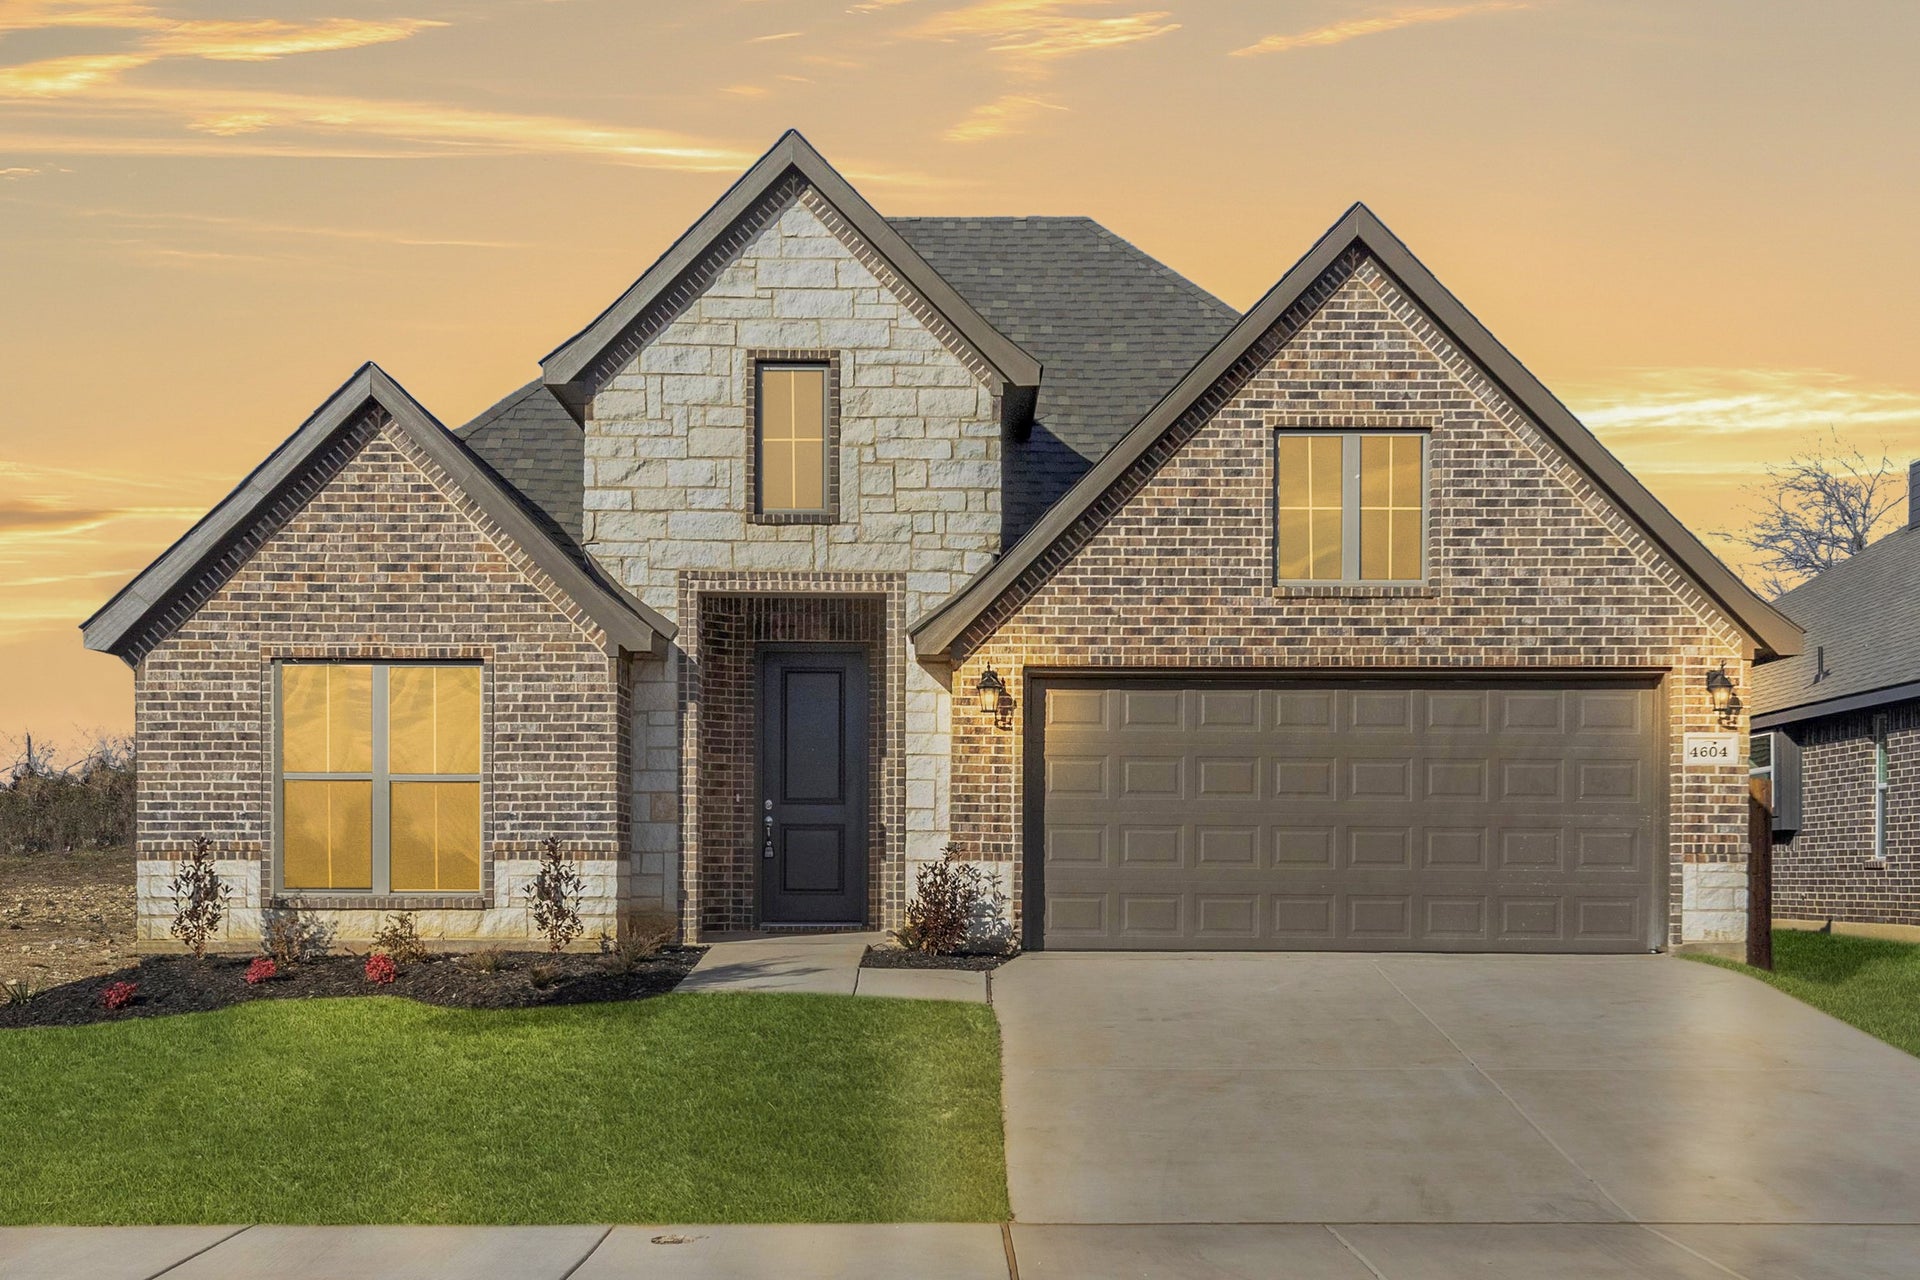 2186 D with Stone. 4br New Home in Heartland, TX